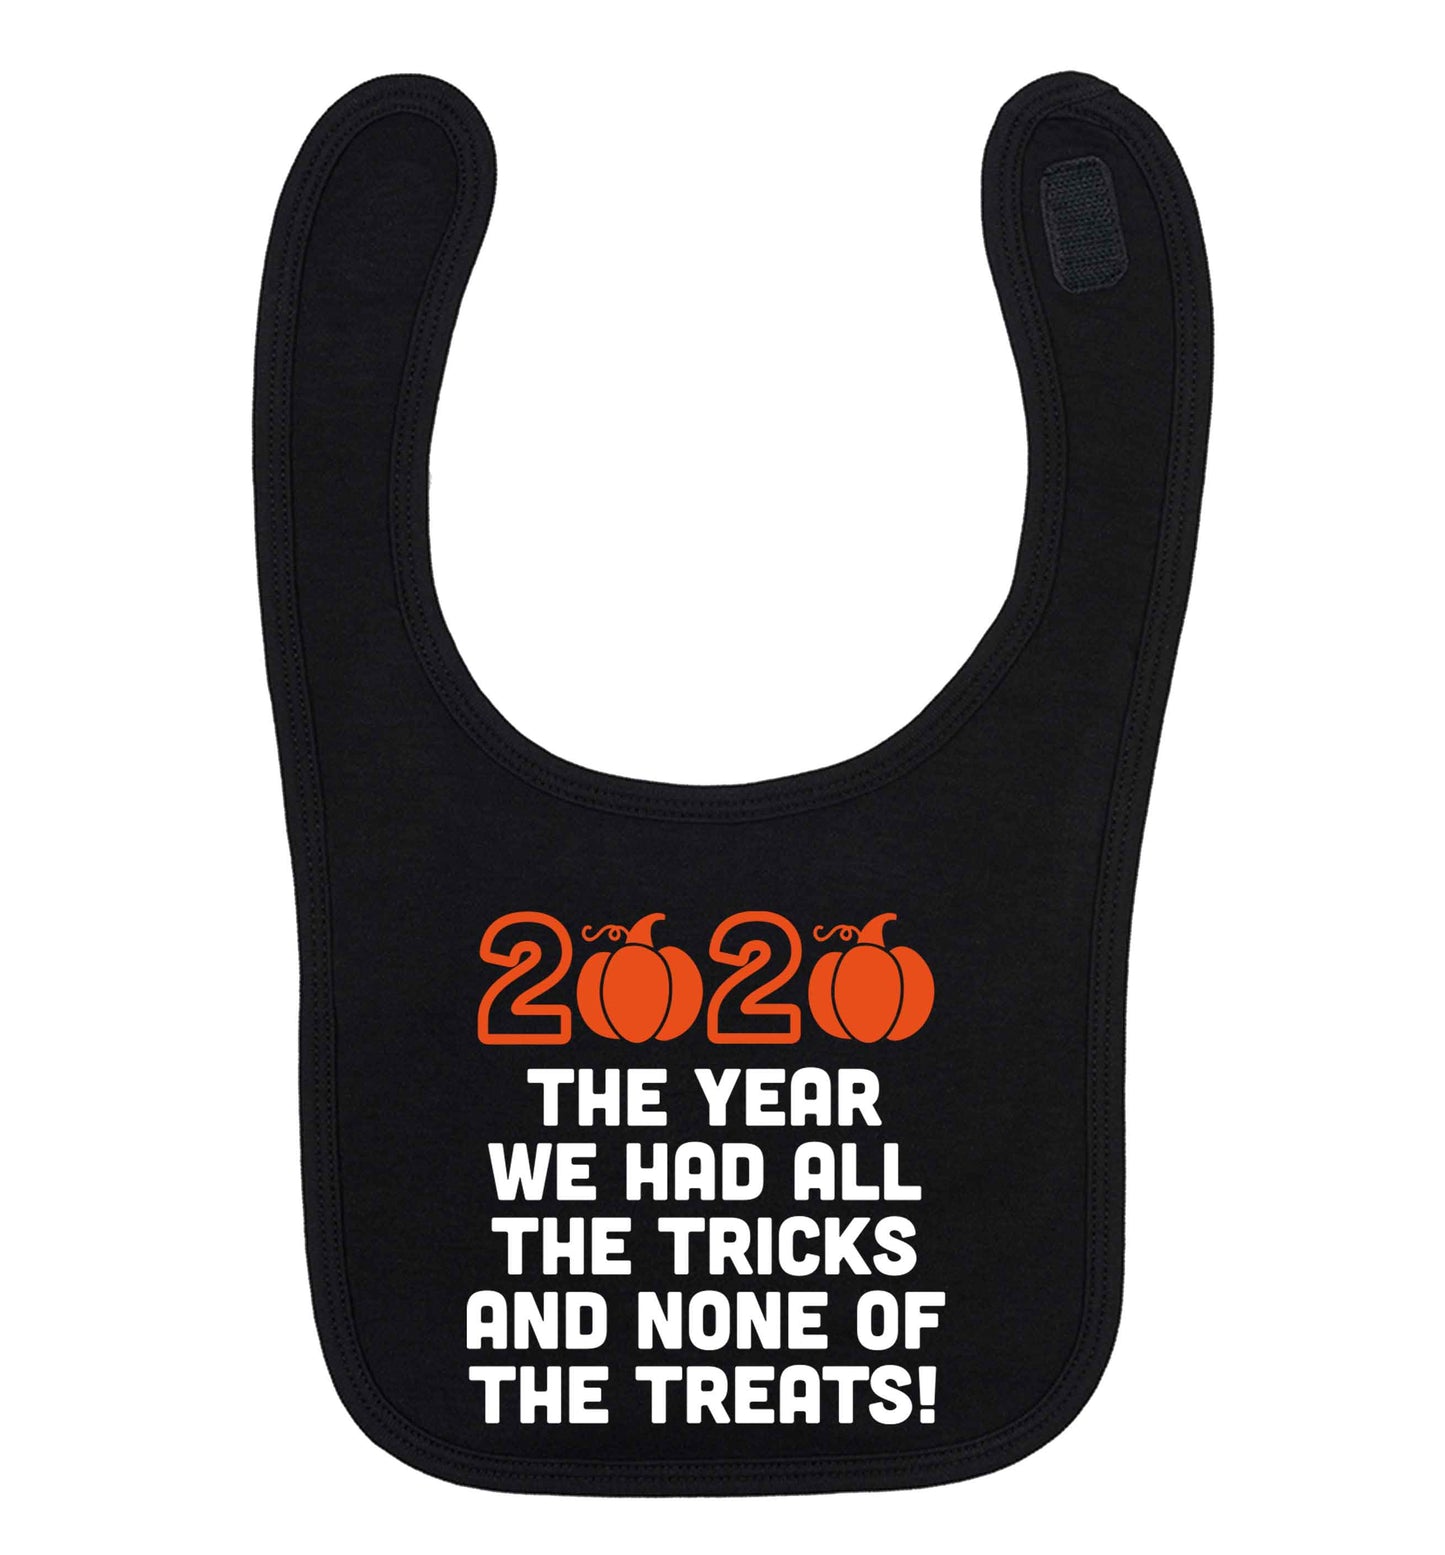 2020 The year we had all of the tricks and none of the treats black baby bib